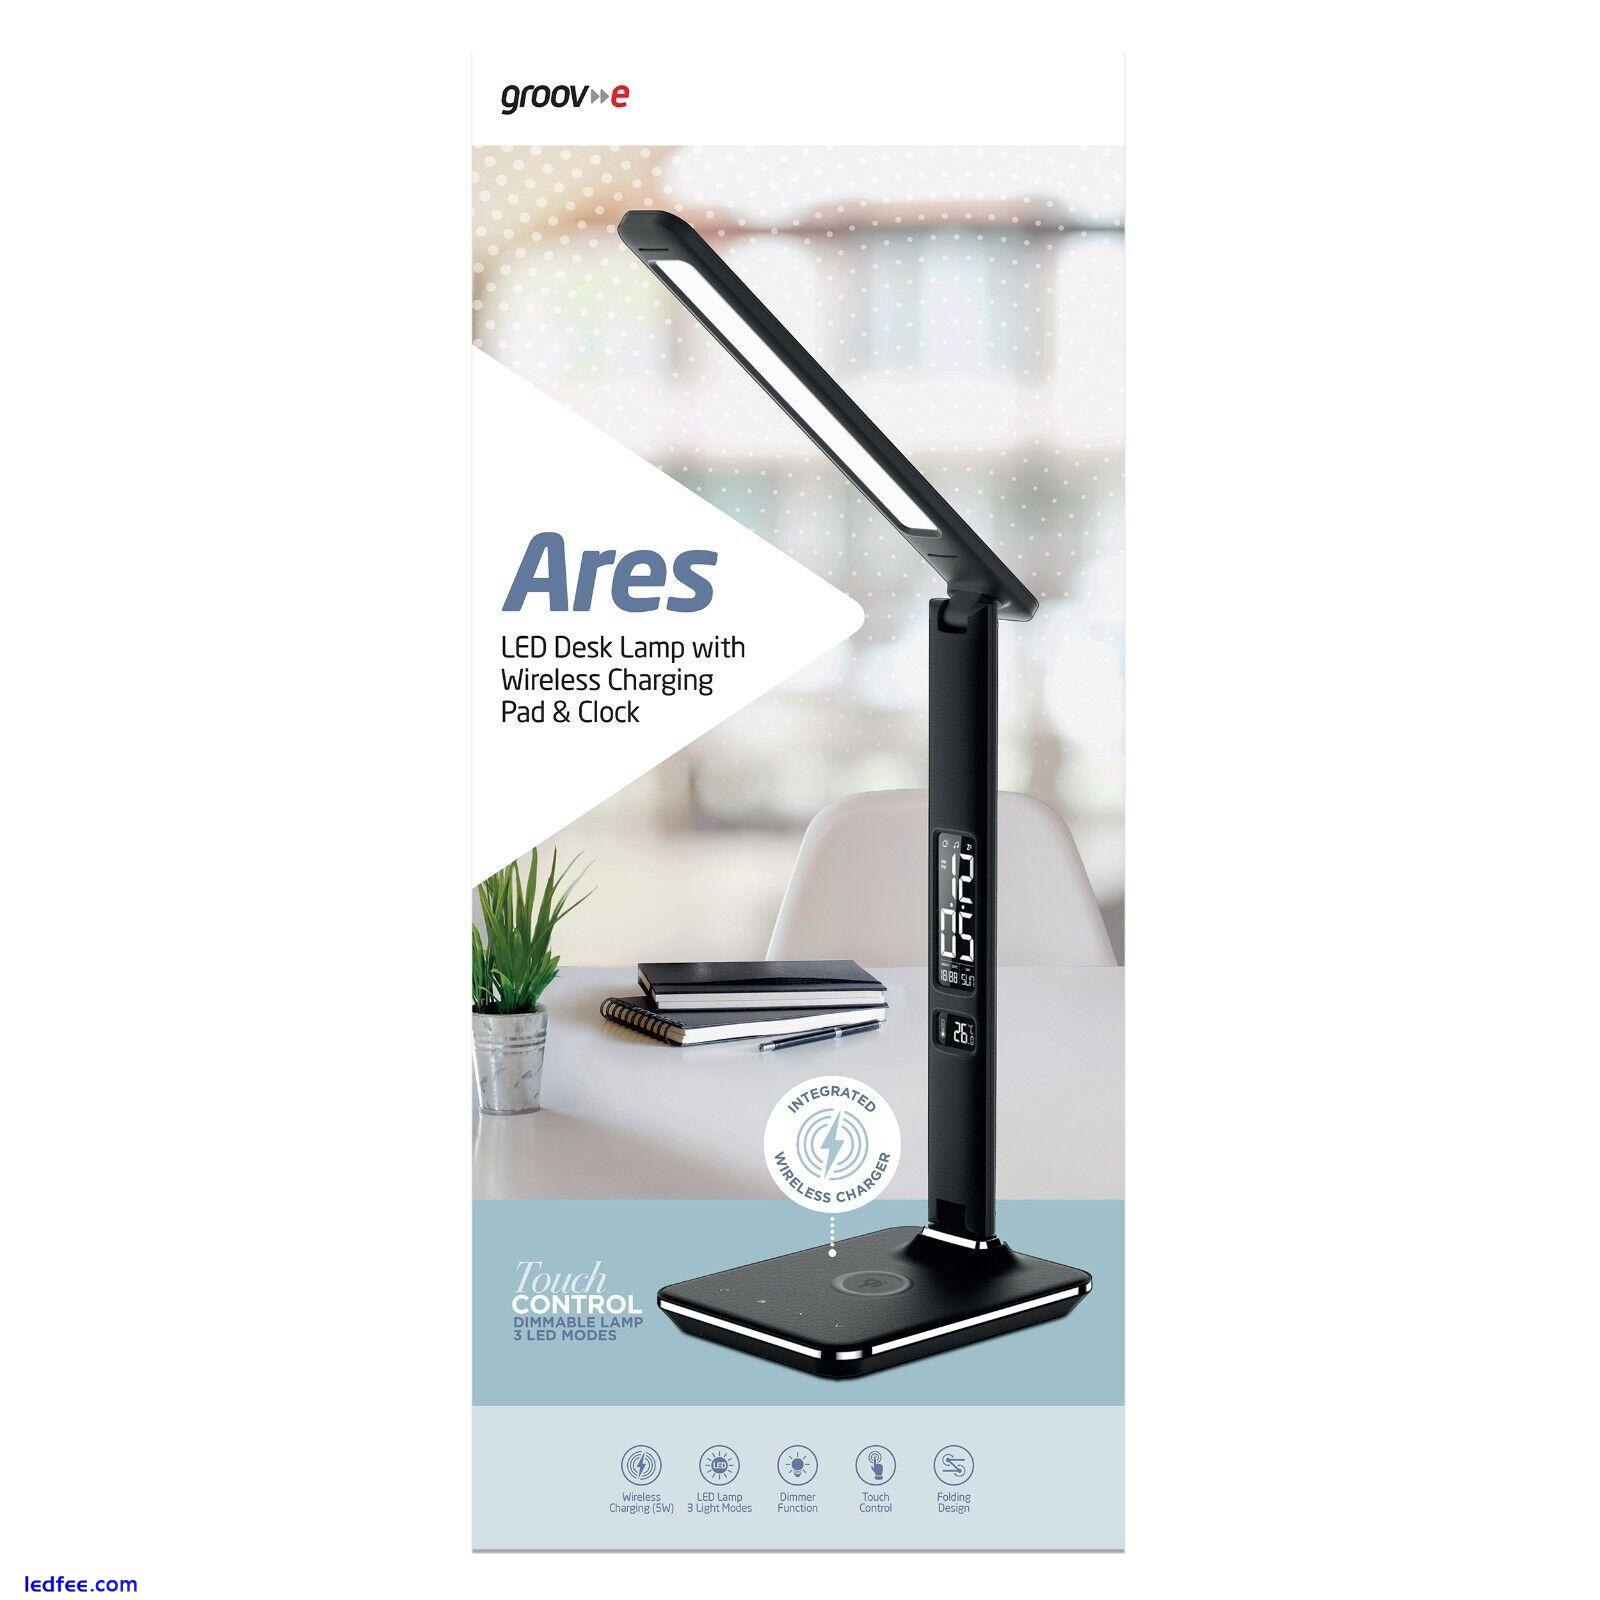 Groov-e ARES LED Desk Lamp with Wireless Charger Pad, Clock and Alarm Black 5 